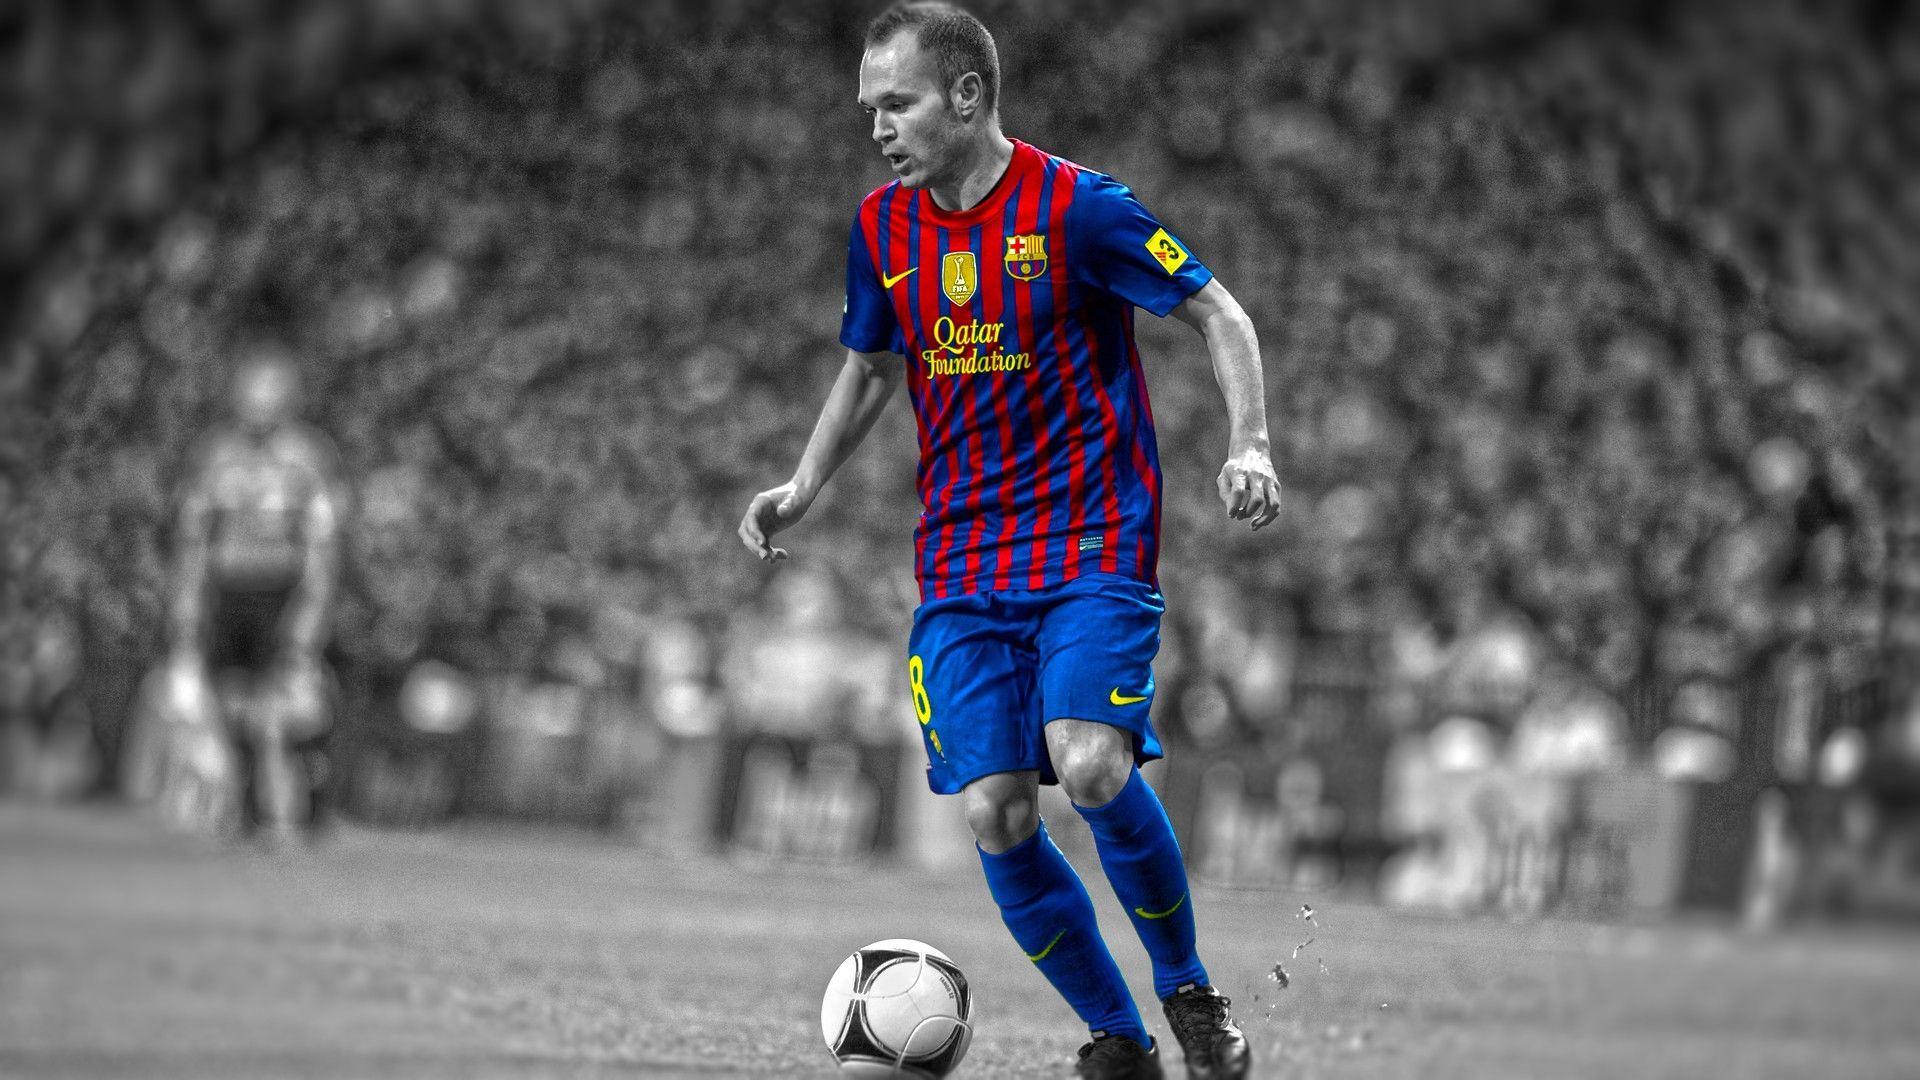 Andres Iniesta Wallpaper High Resolution and Quality Download